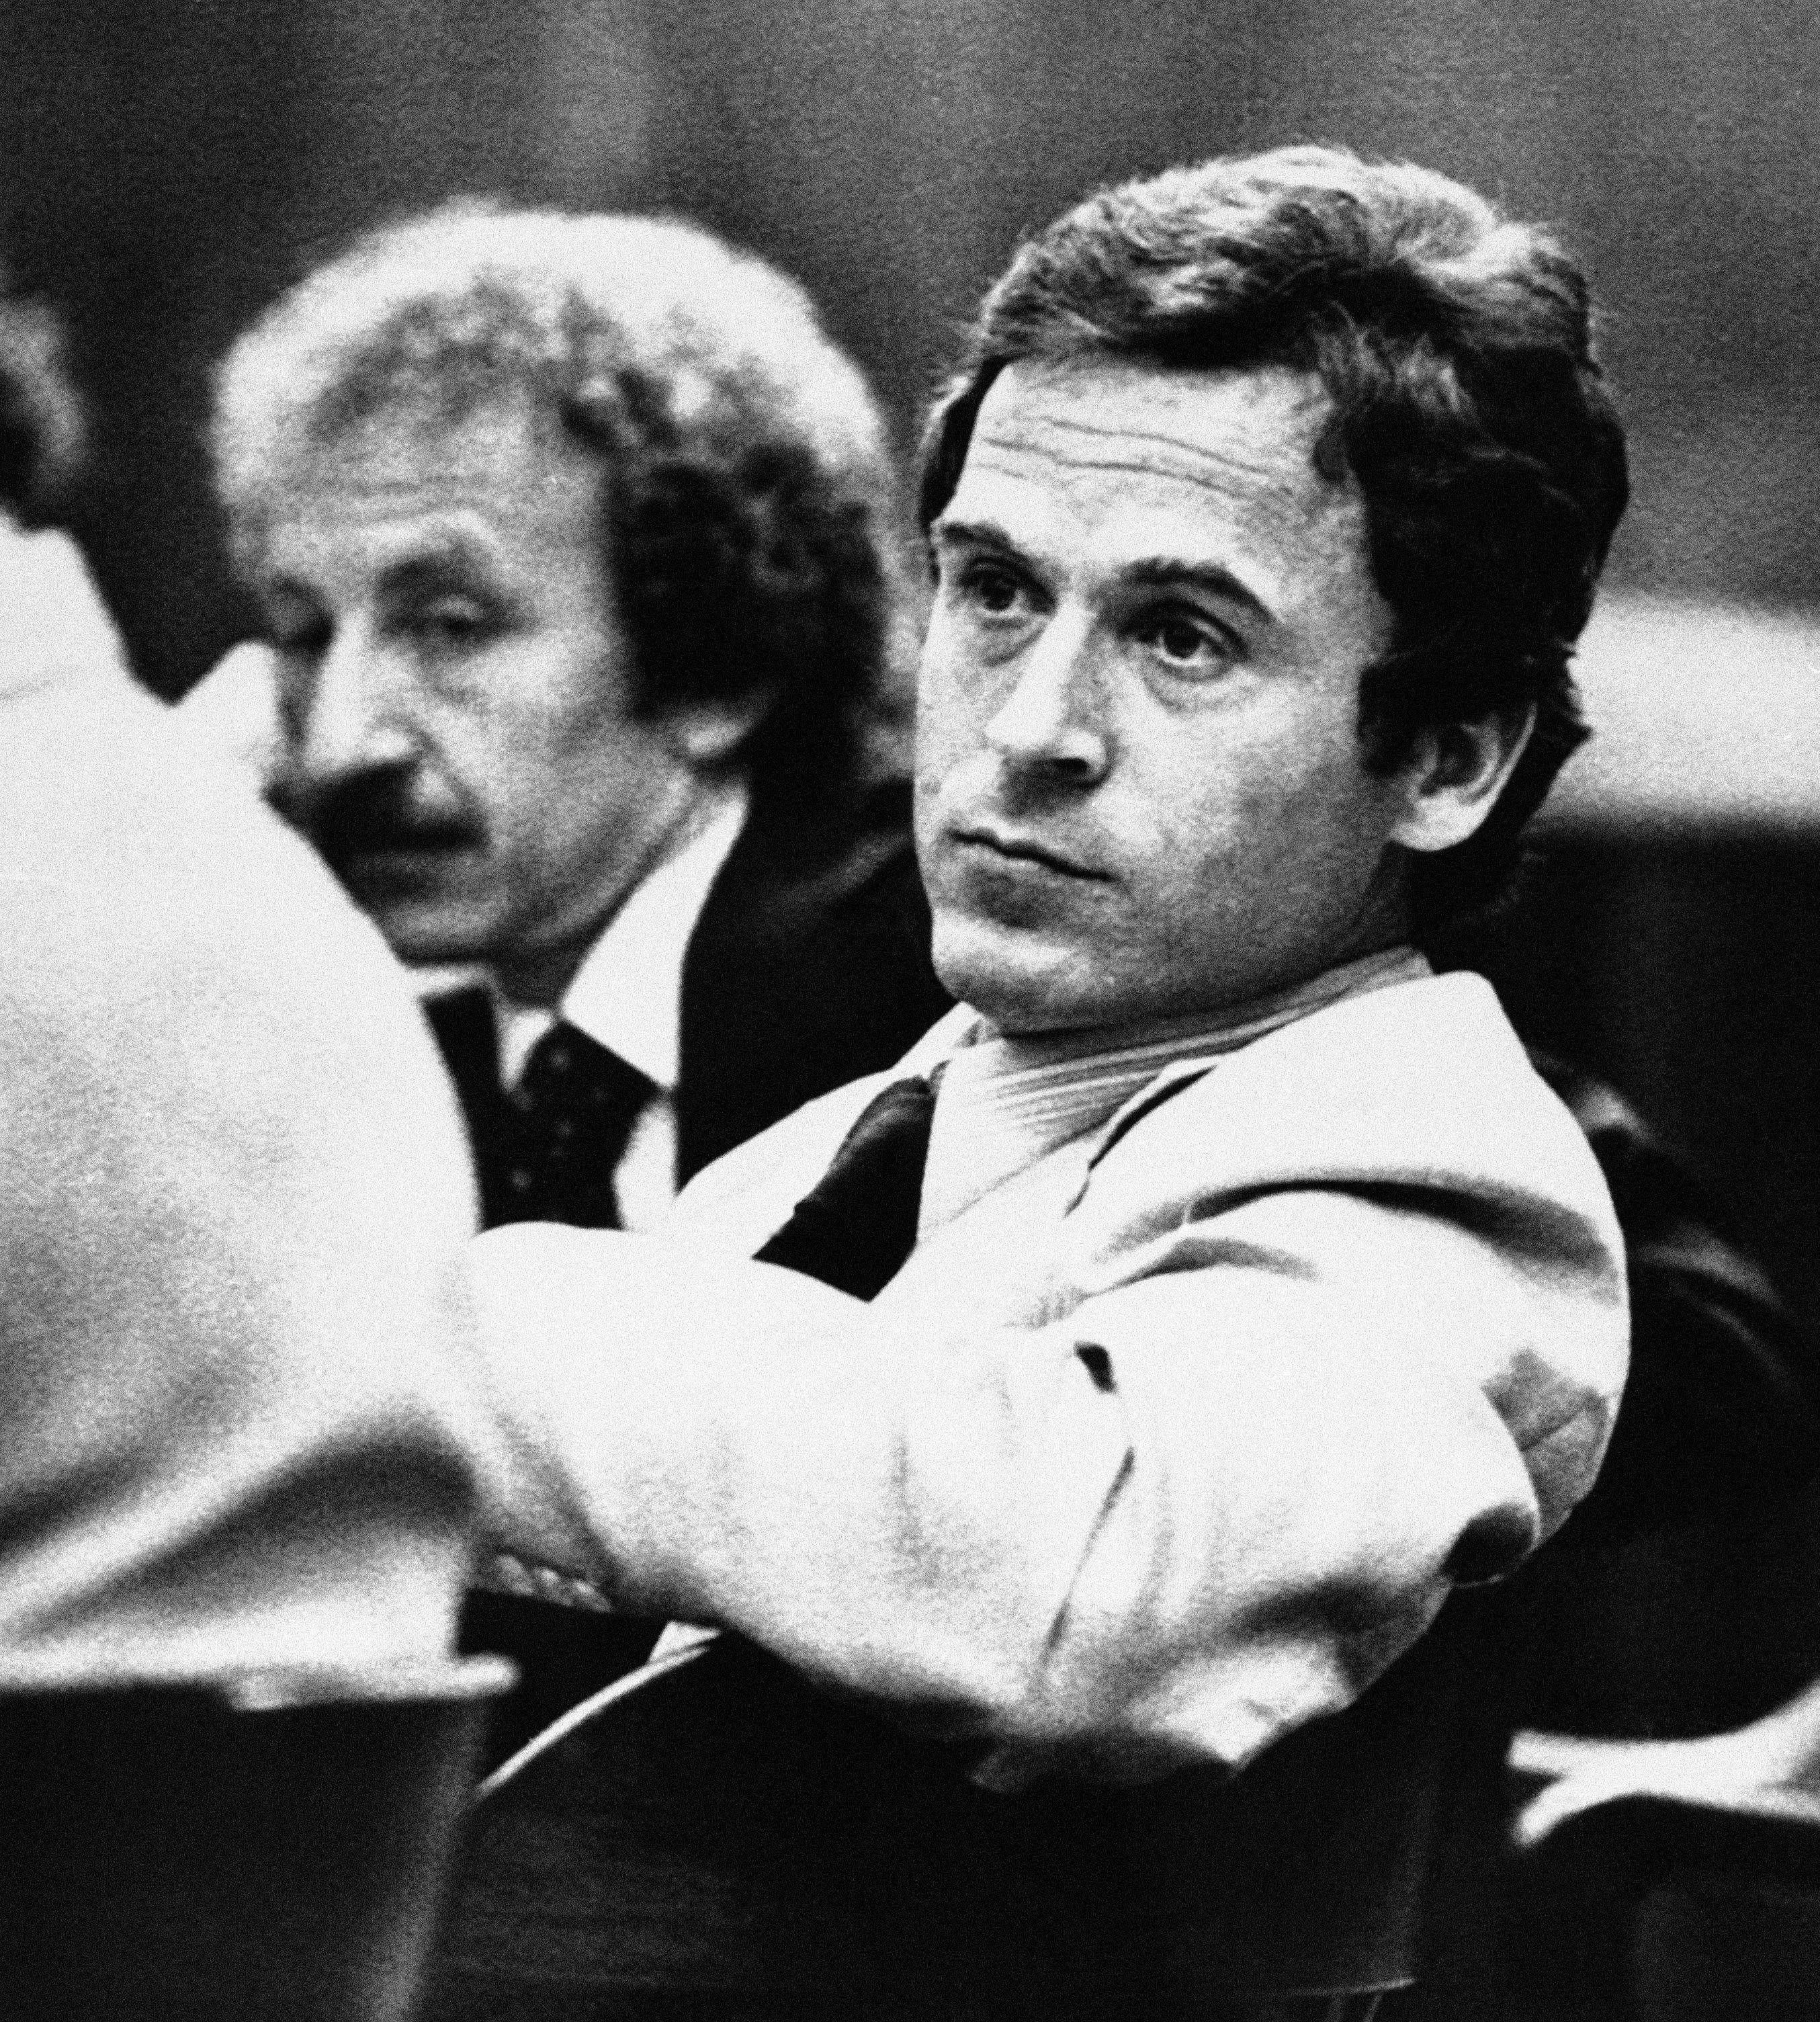 The new Ted Bundy documentary will be aired on discovery+ (